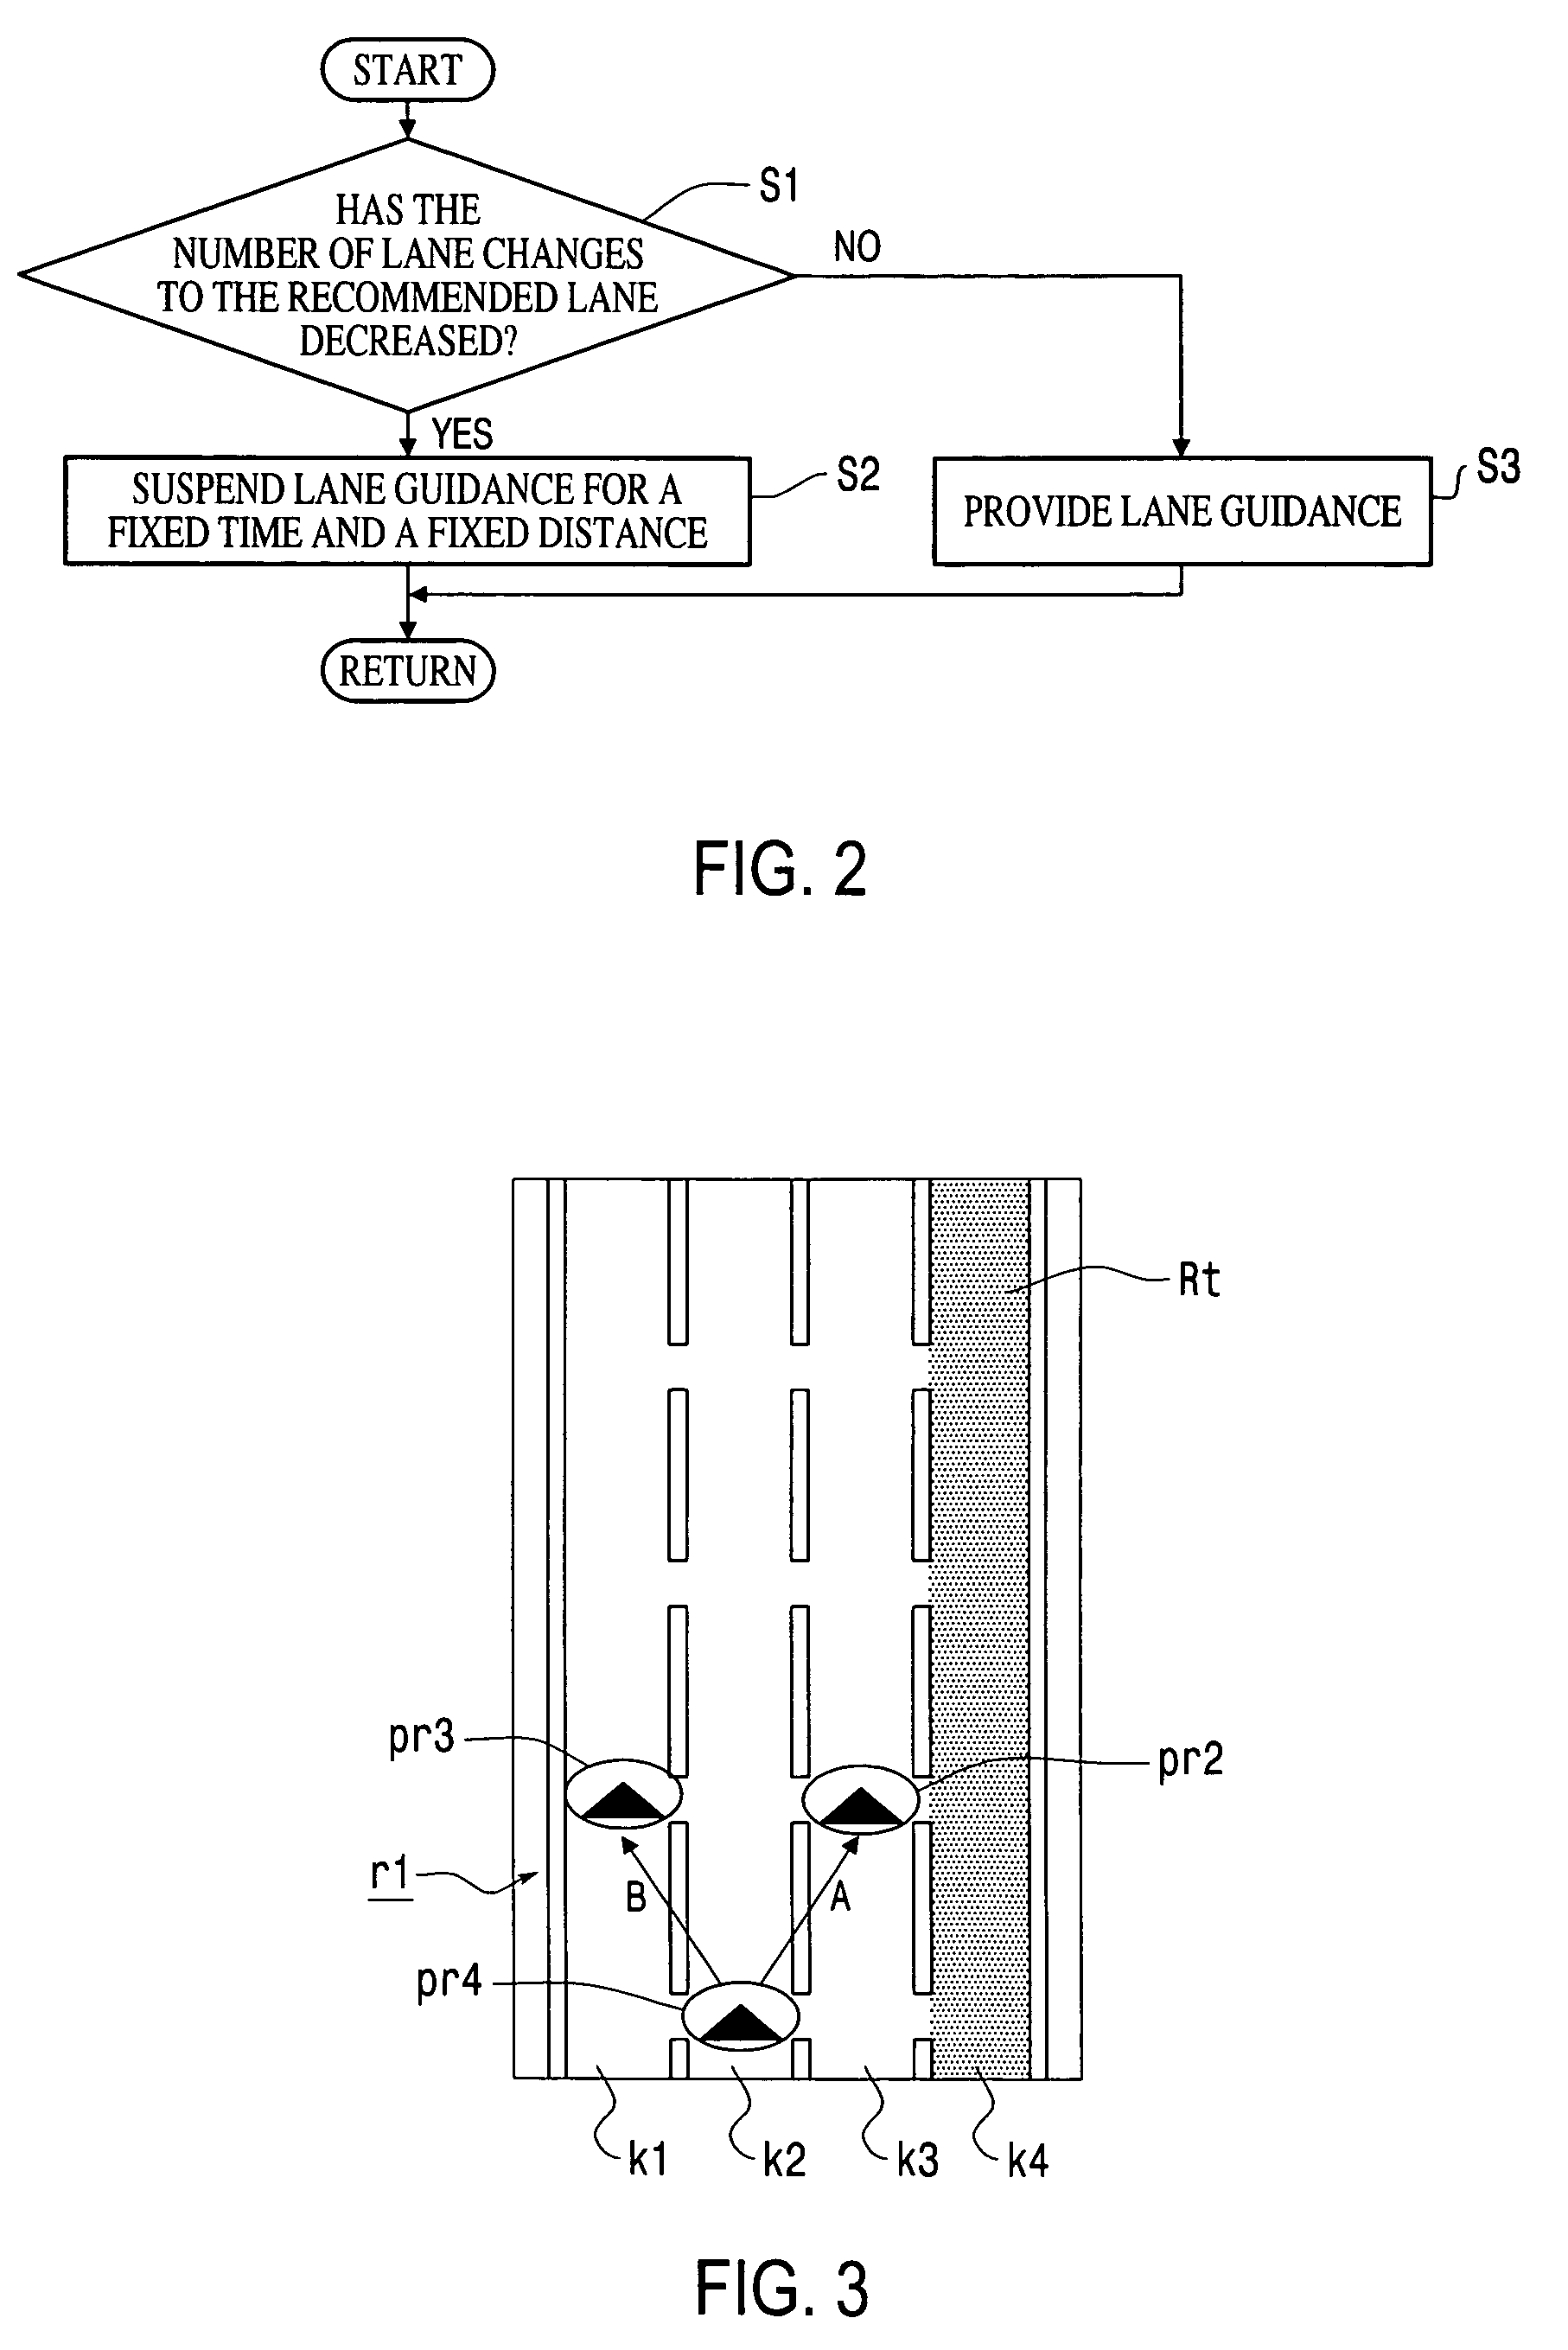 Route guidance systems, methods, and programs